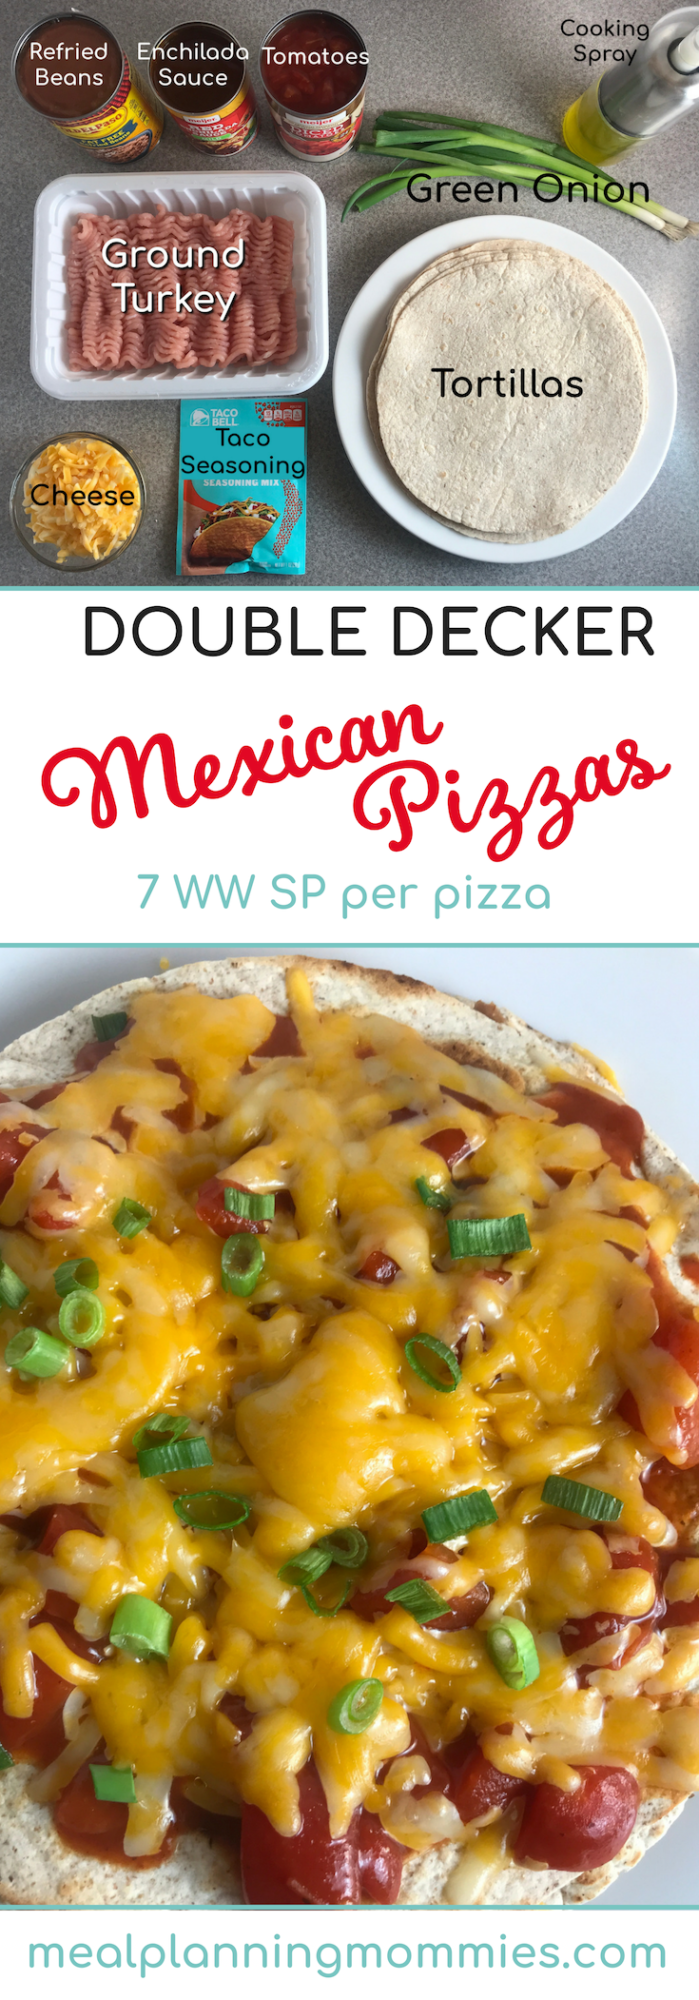 Double Decker Mexican Pizzas on Meal Planning Mommies - Just 7 WW SP per pizza